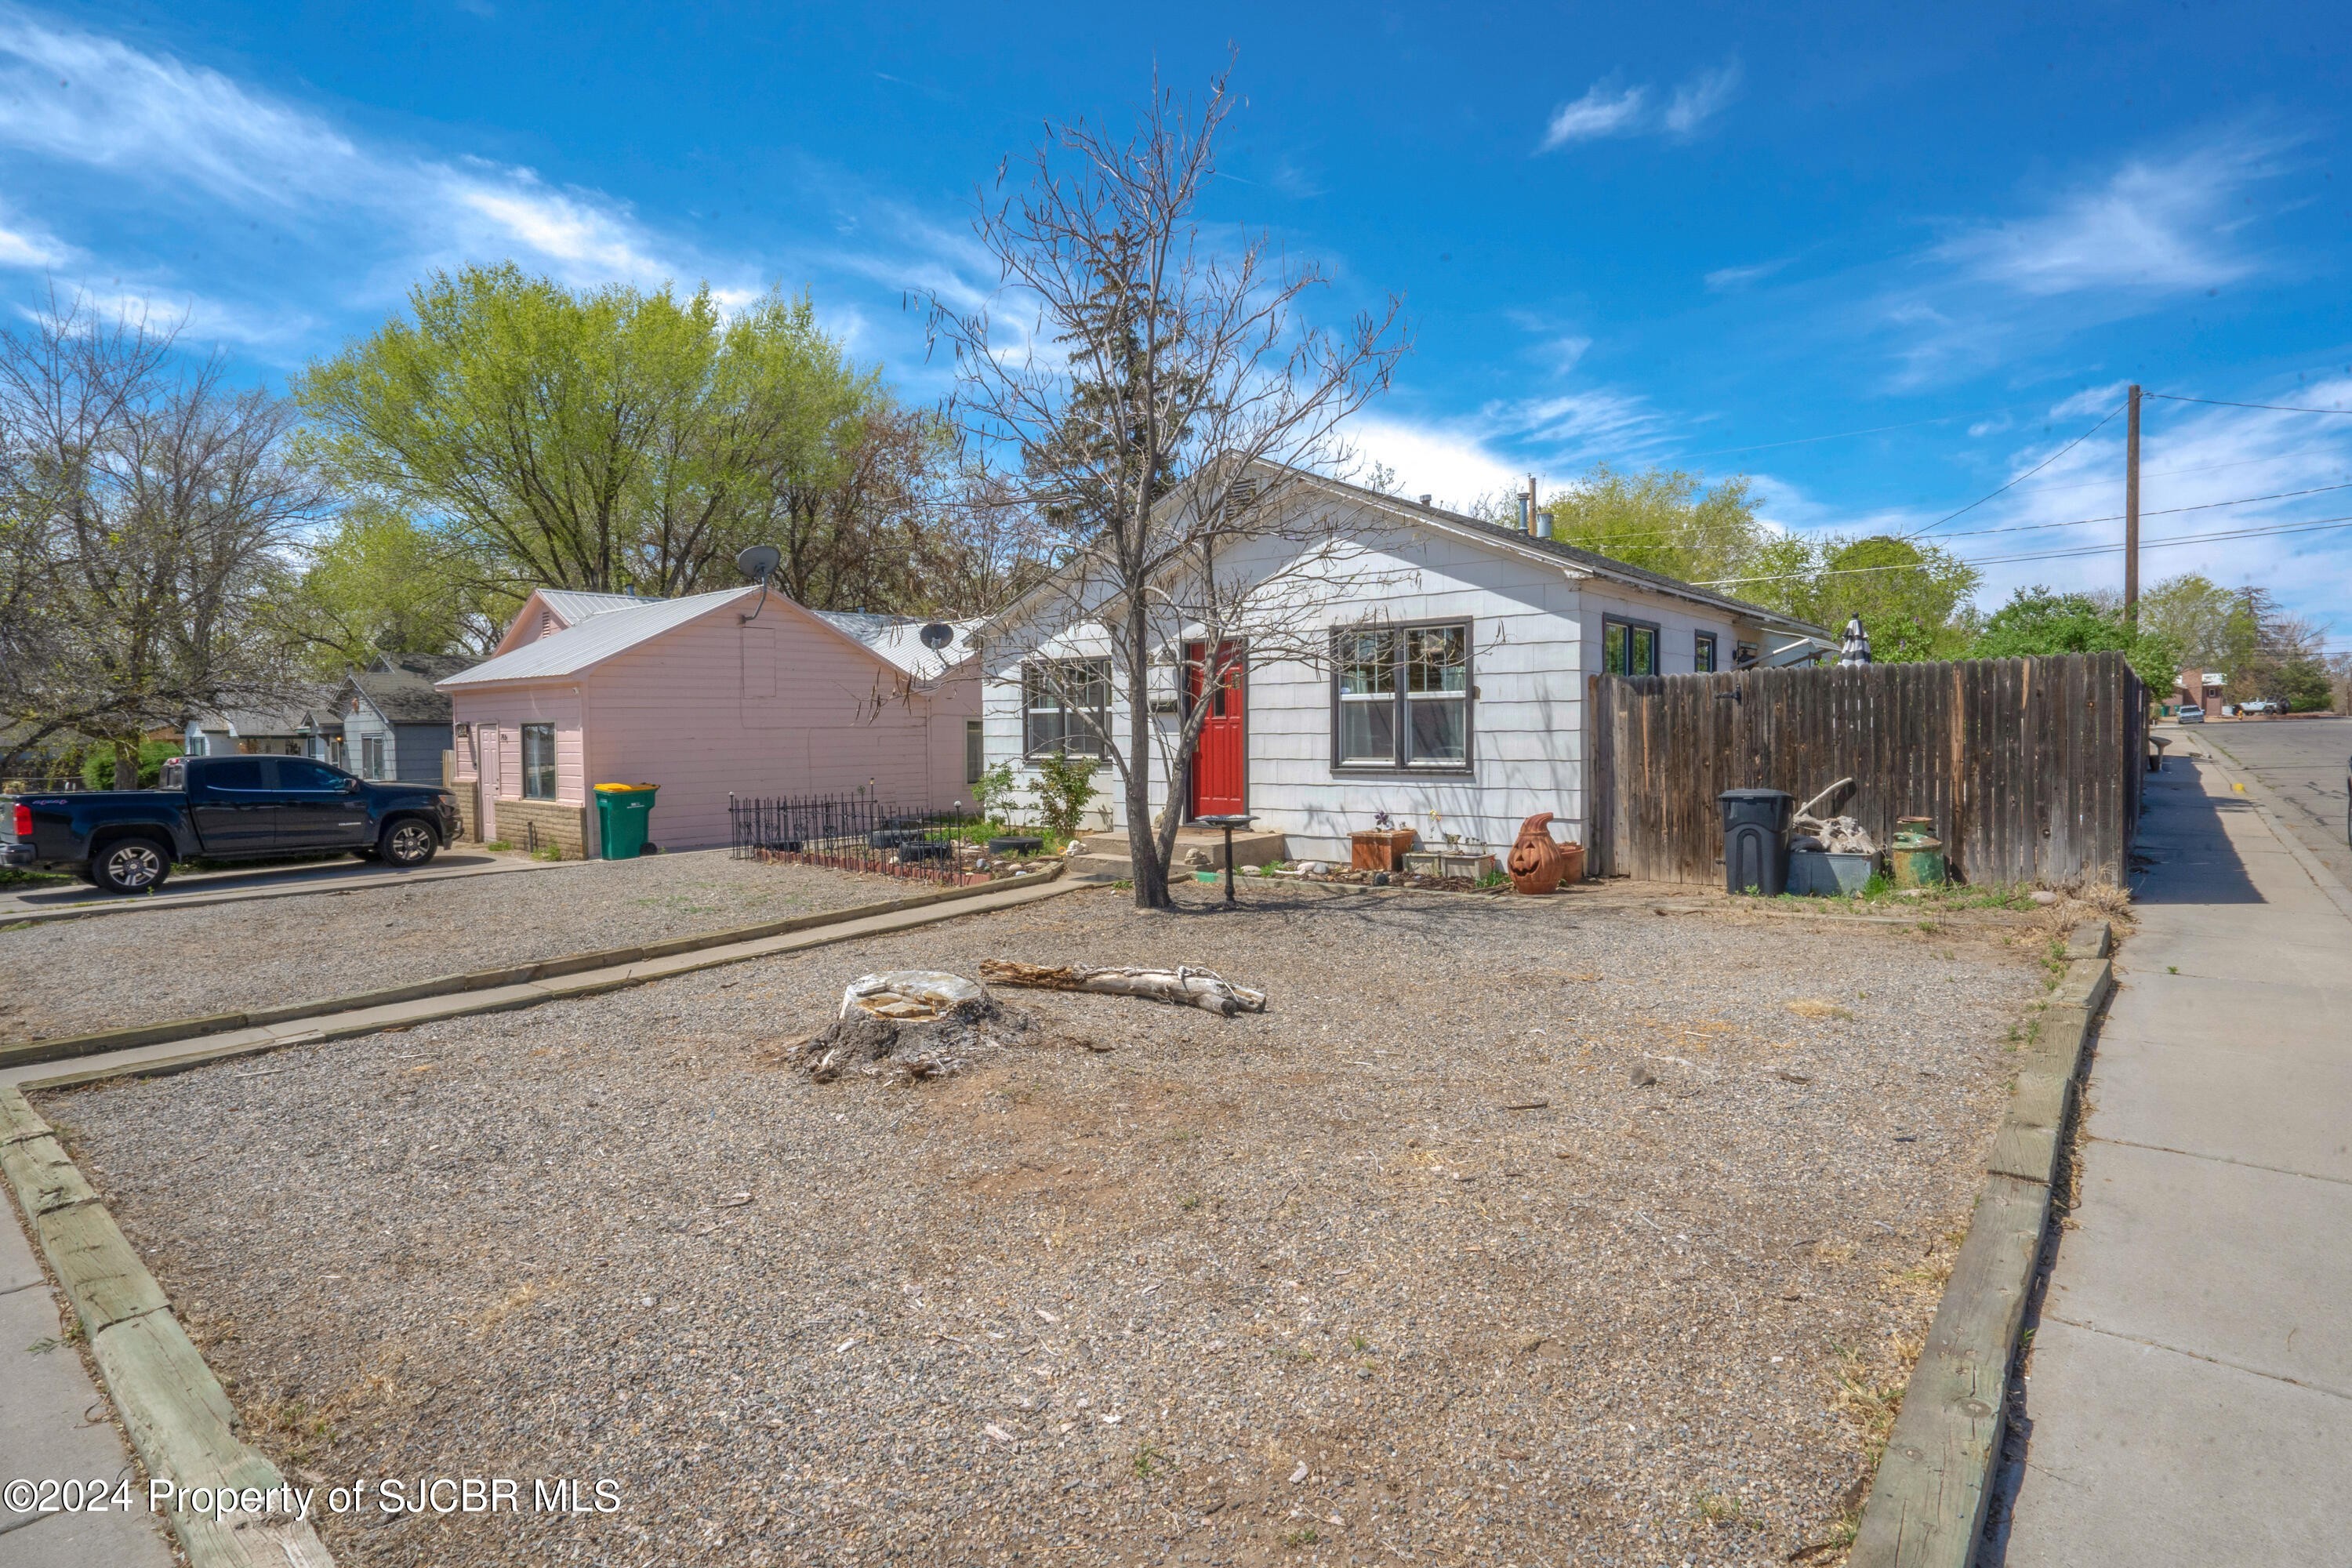 19. 715 N Orchard Avenue